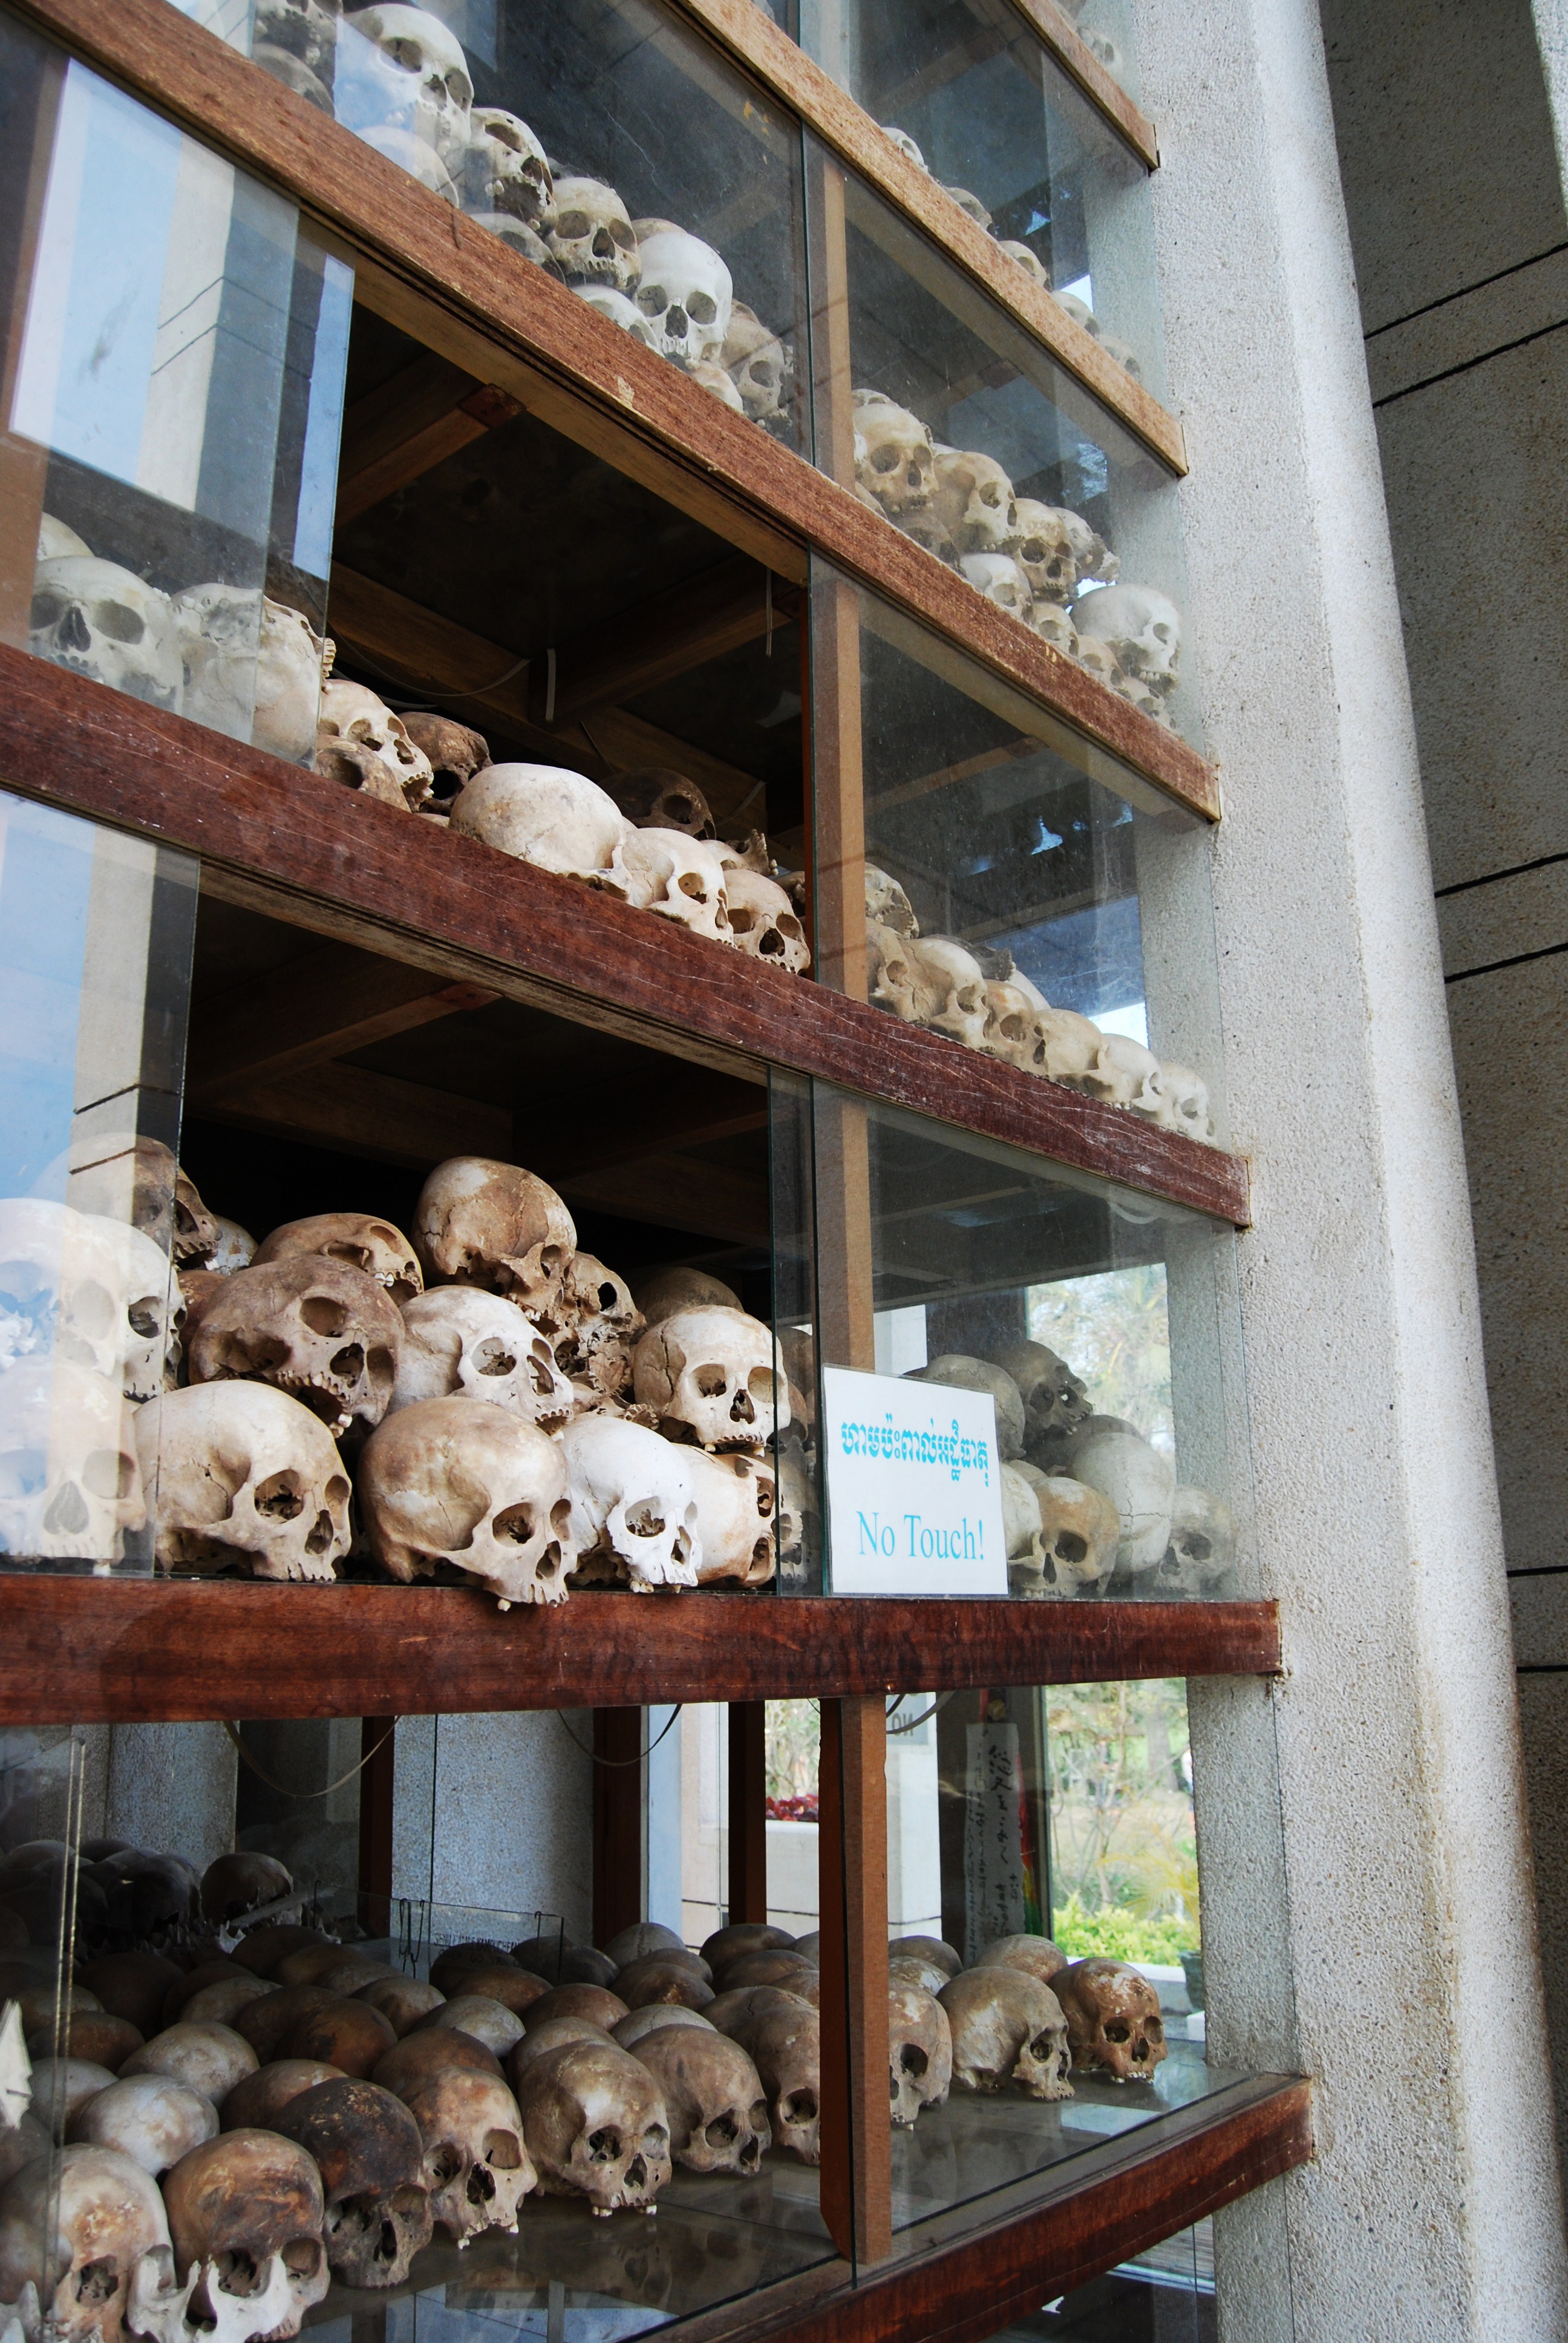 Killing Fields of Phnom Pehn filled with Mass Graves